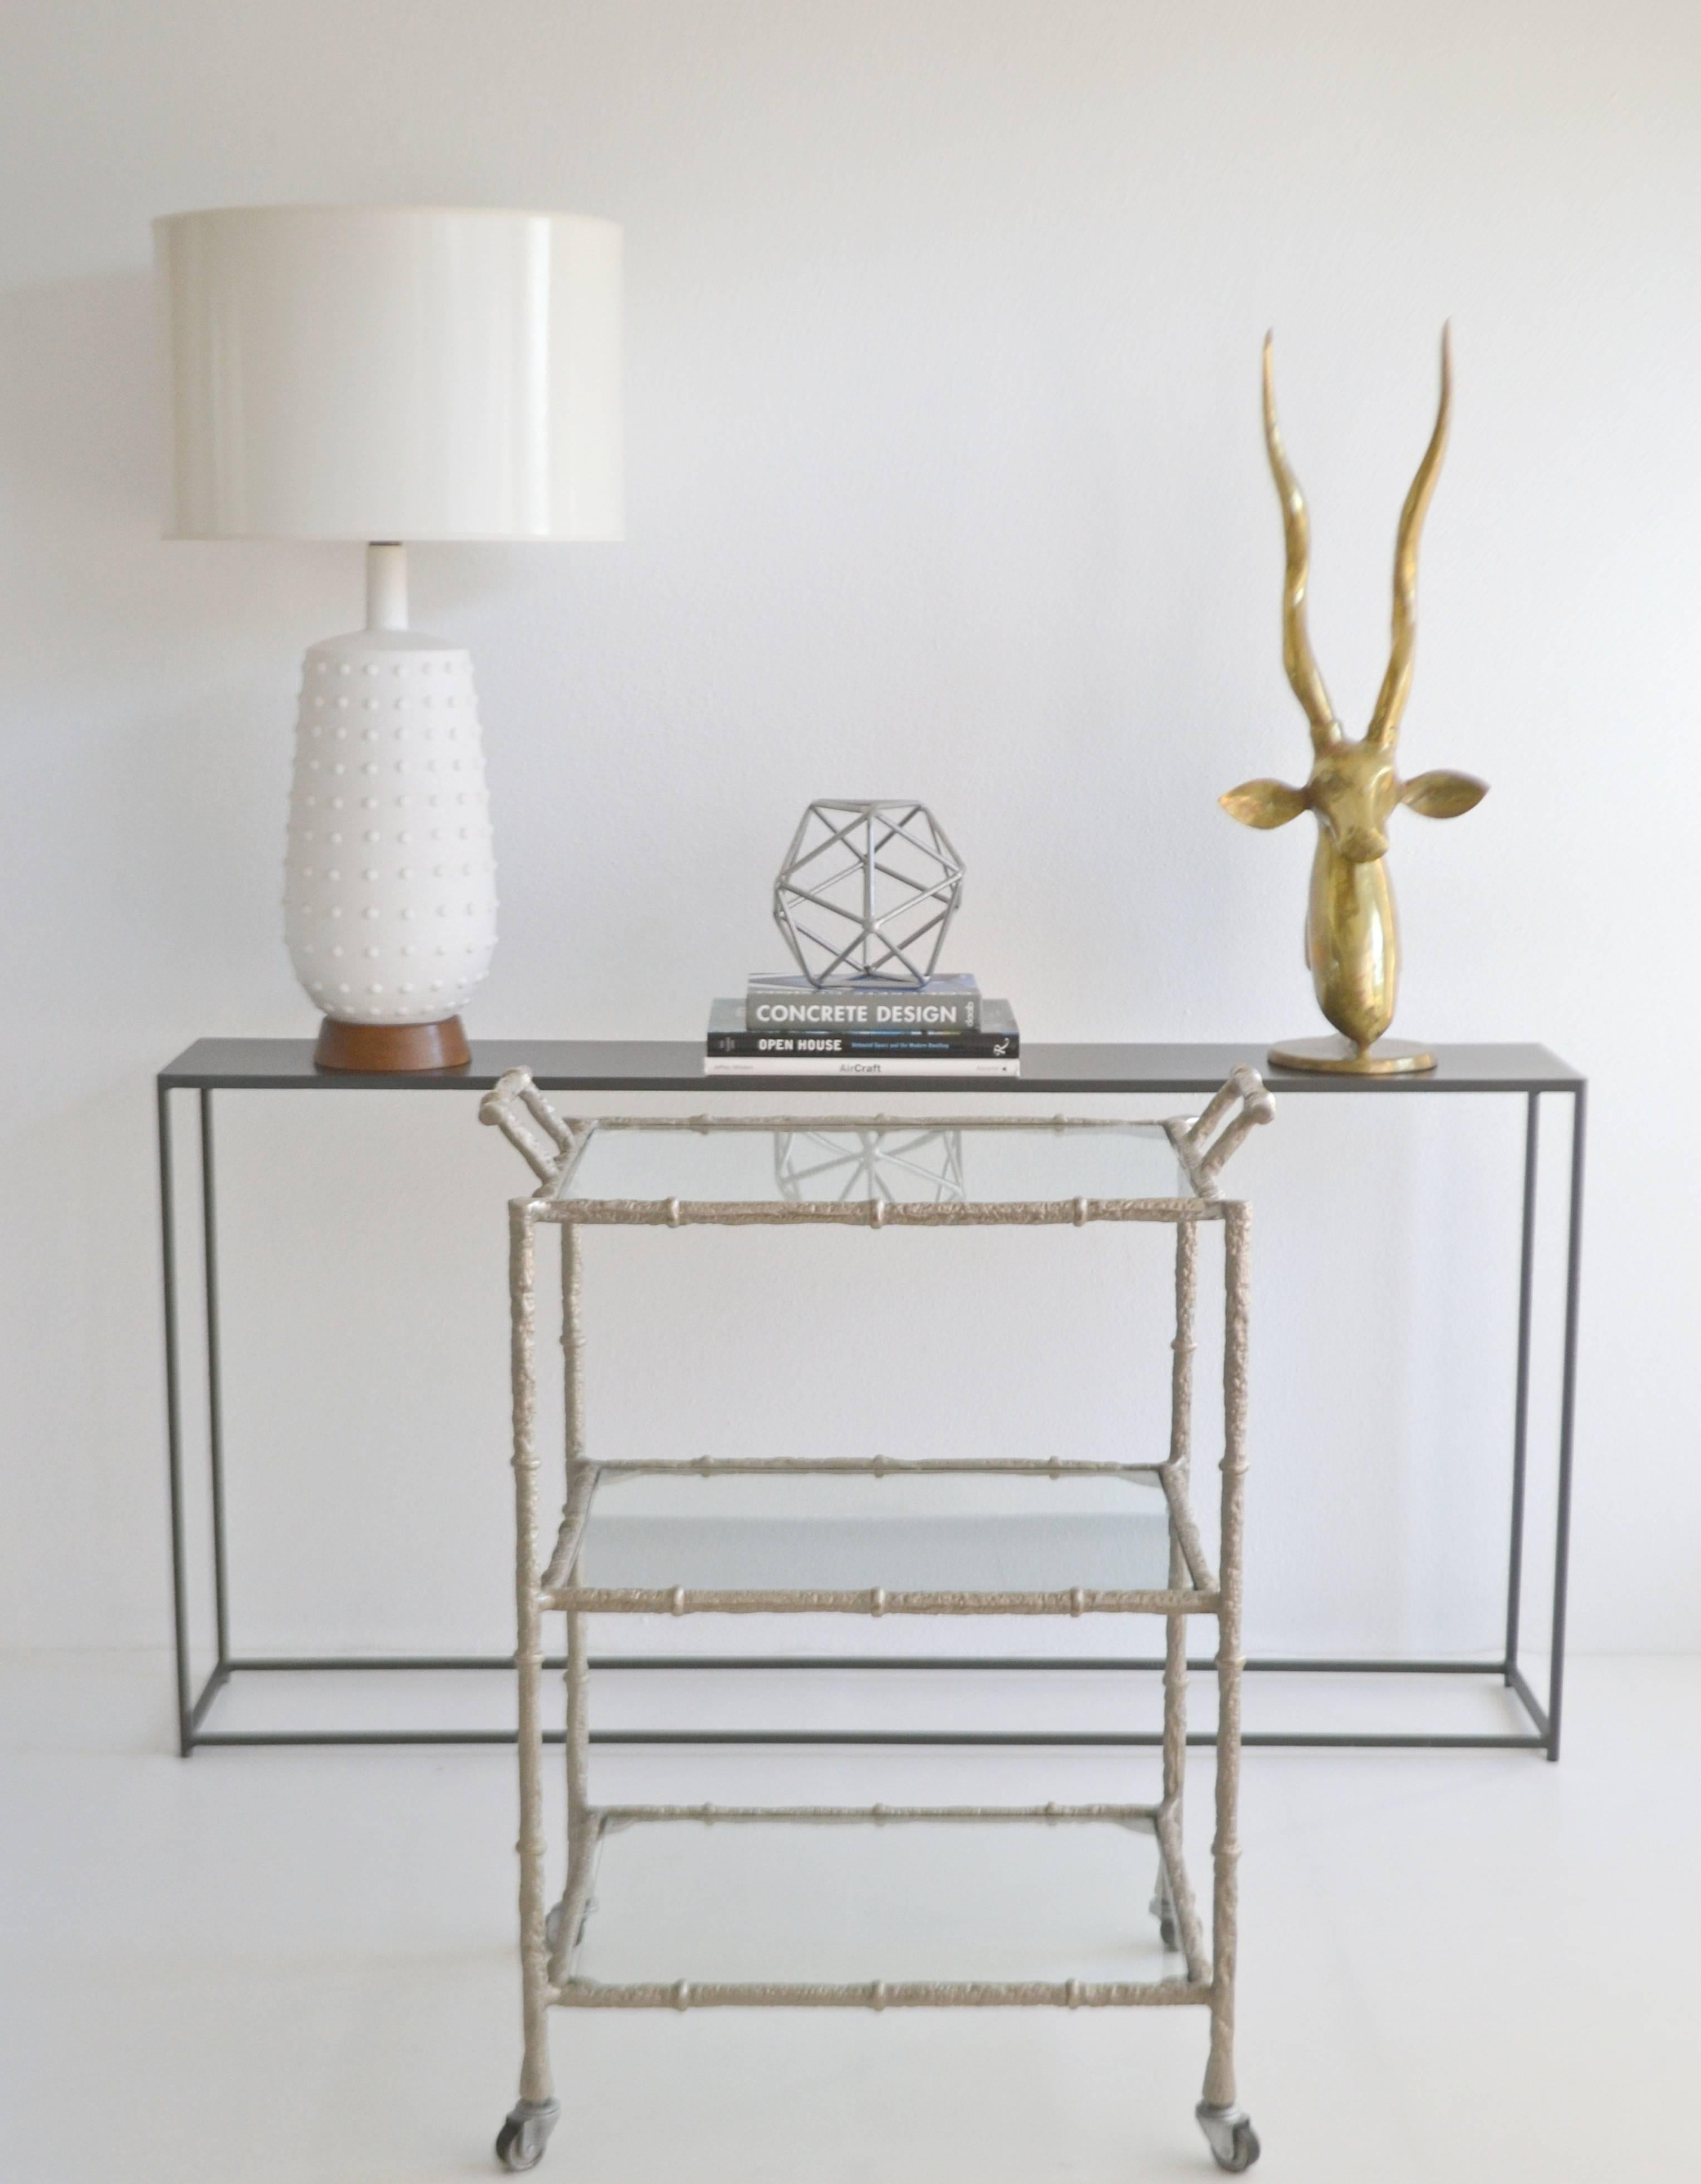 Glamorous Hollywood Regency faux bamboo nickel and glass bar cart, circa 1950s-1960s. This sculptural three-tiered artisan crafted drinks table or serving trolley is designed of etched hand-wrought burnished nickel and accented with glass inset